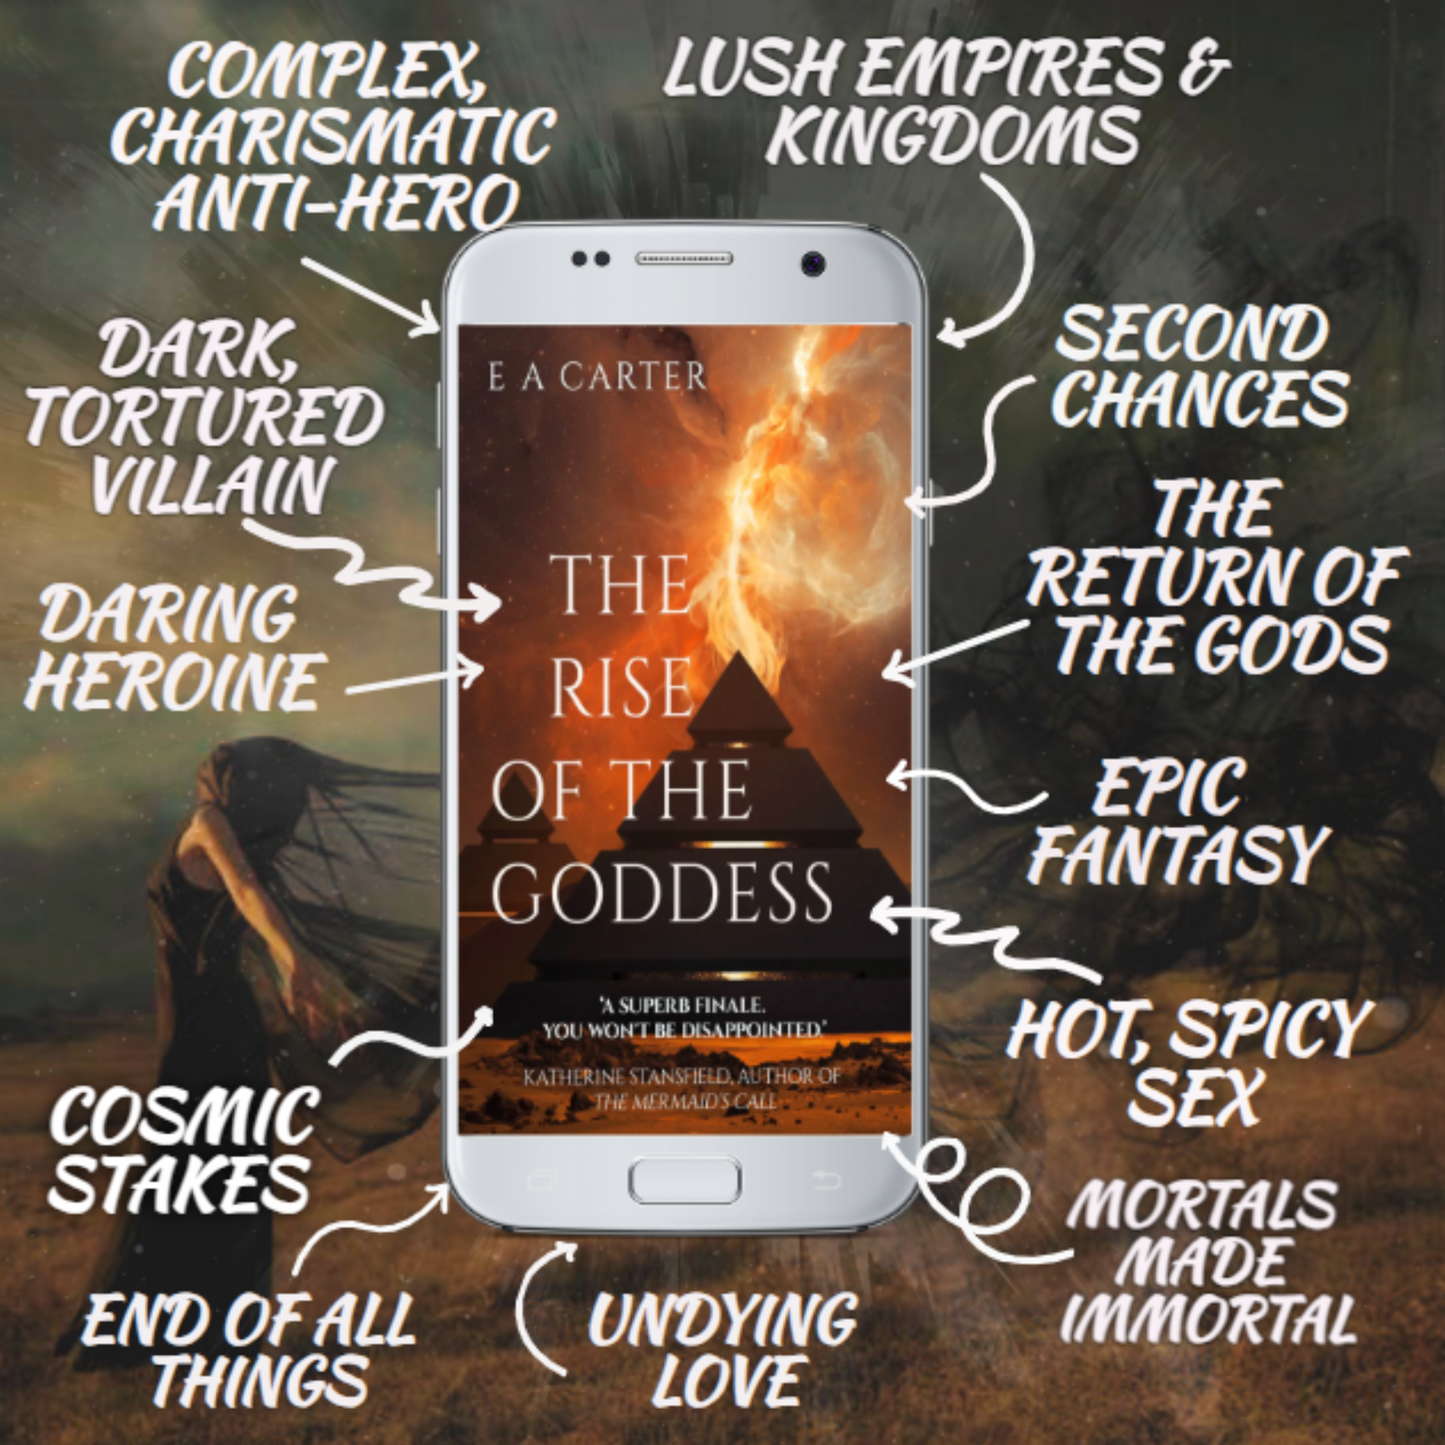 The Rise of the Goddess Paperback